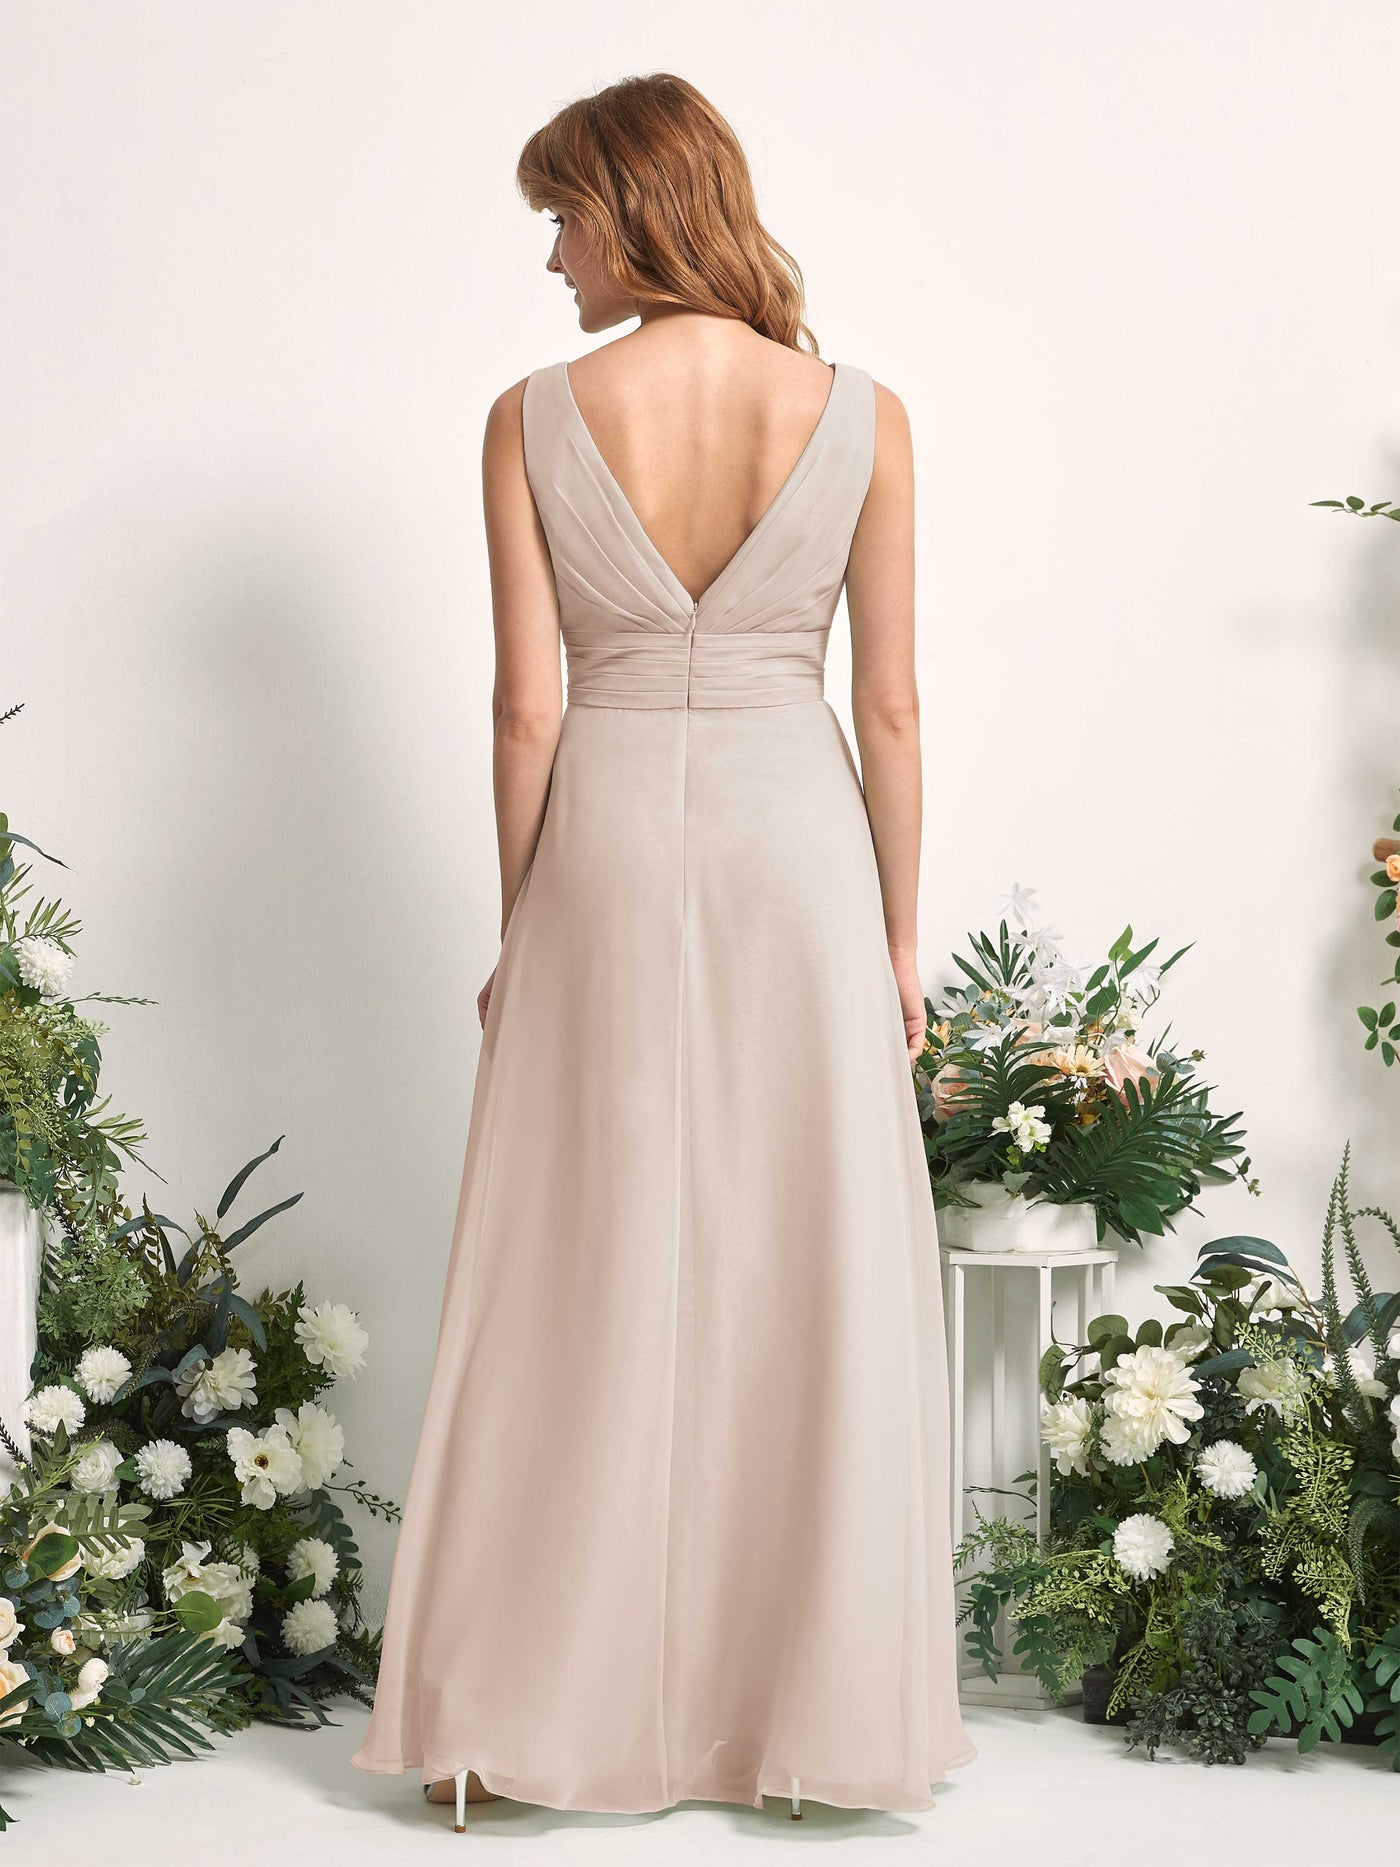 Bridesmaid Dress A-line Chiffon V-neck Full Length Sleeveless Wedding Party Dress - Champagne (81227116)#color_champagne